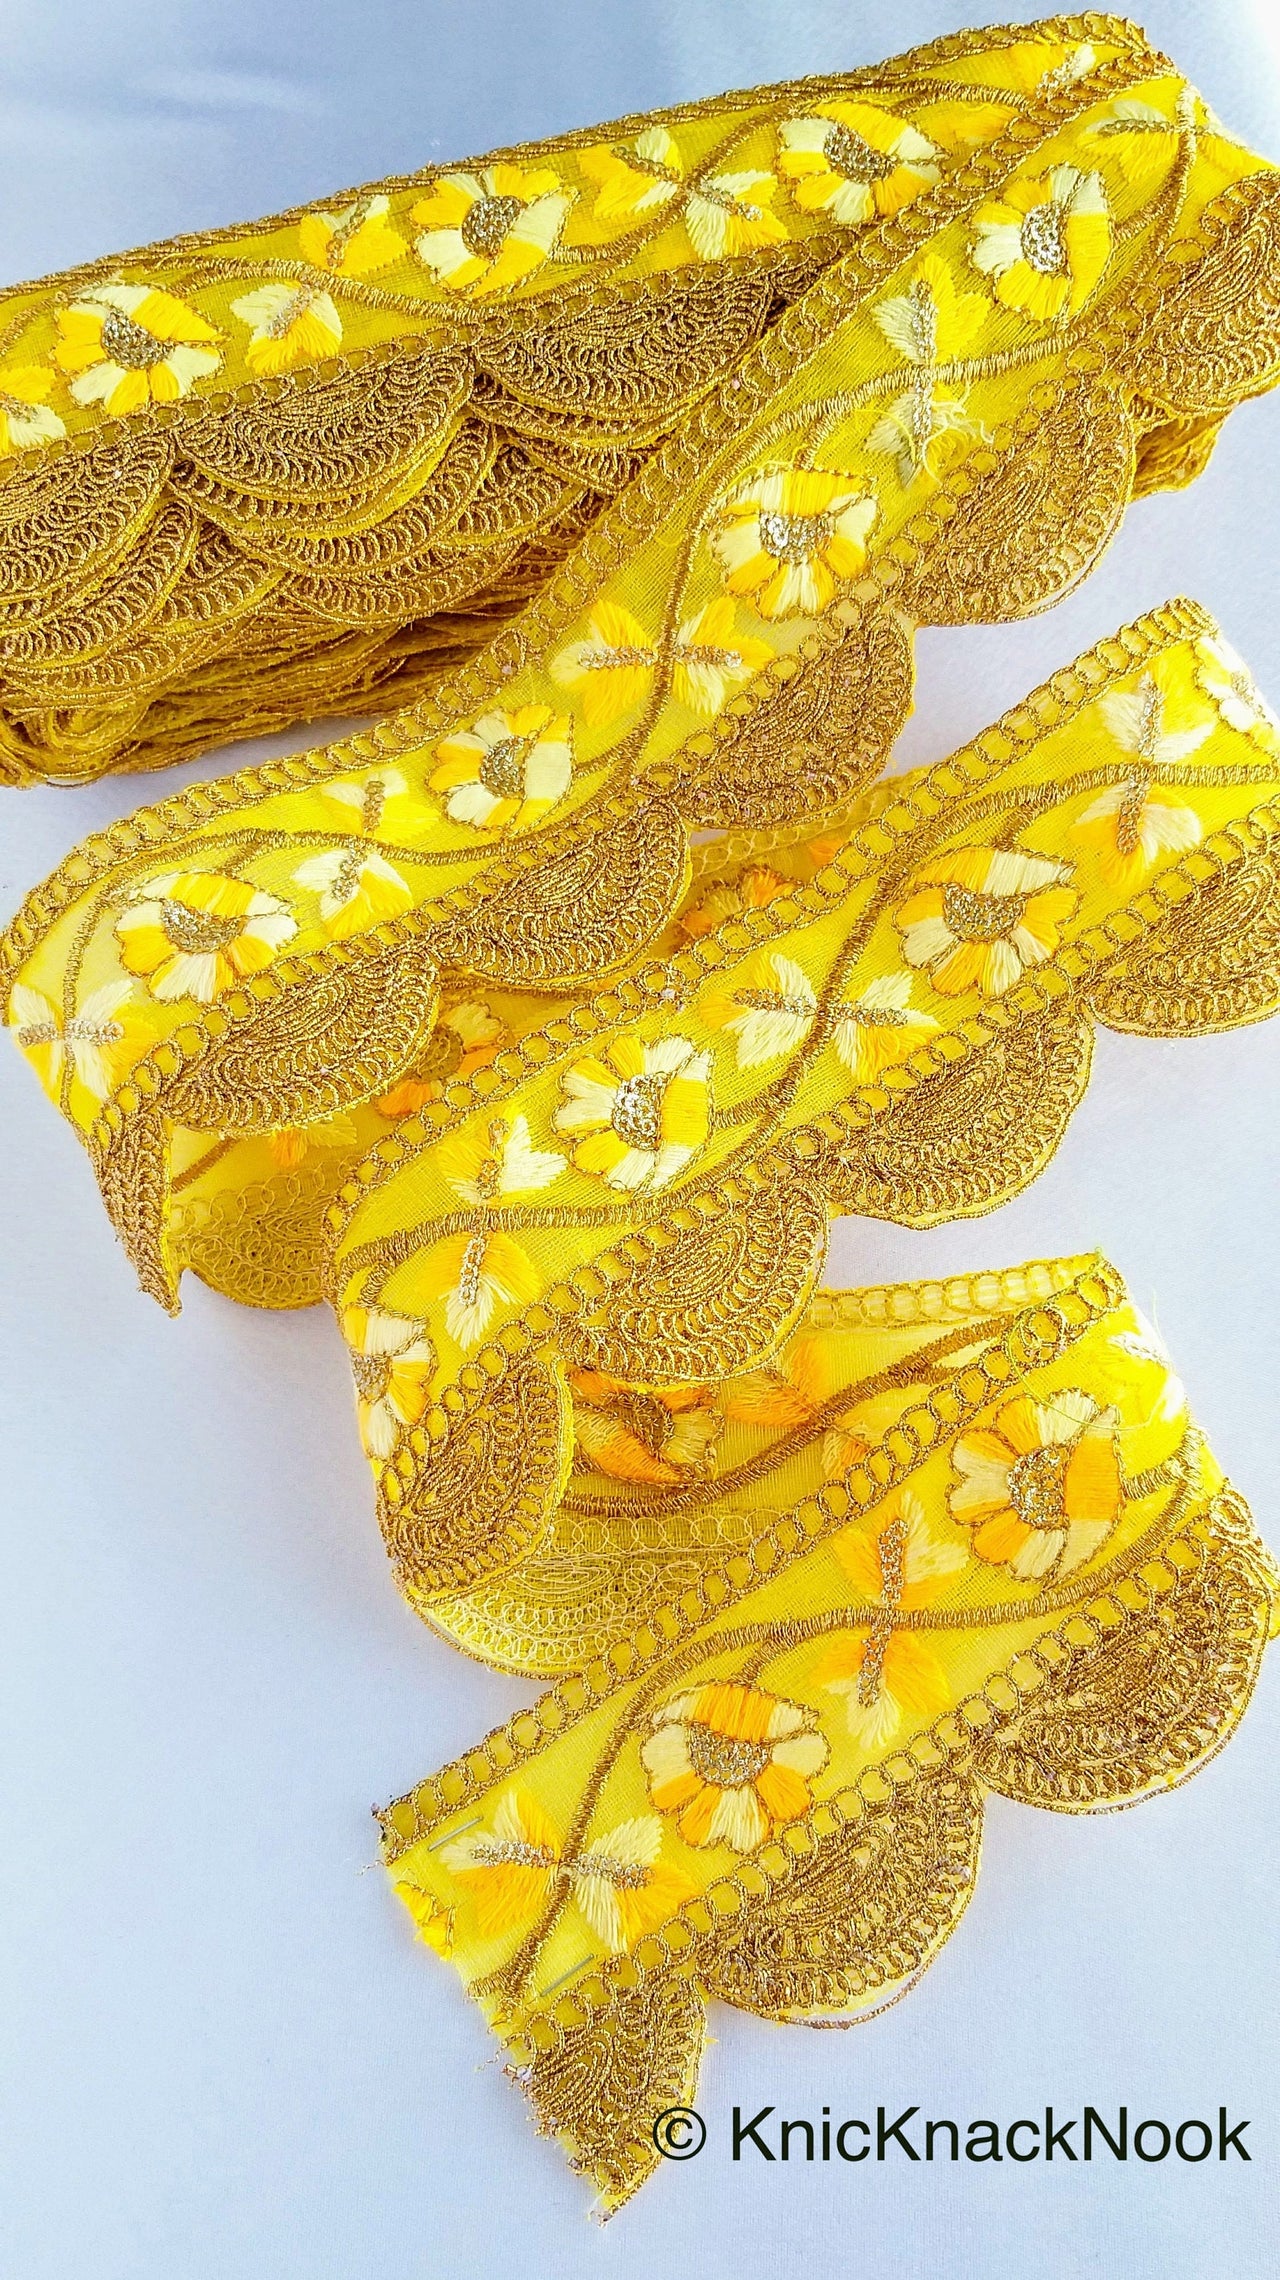 Green / Yellow / Orange And Gold Embroidered Fabric Trim With Floral Embroidery, Scallop Trim, Approx. 65mm Wide - 210119L174 / 75 / 76